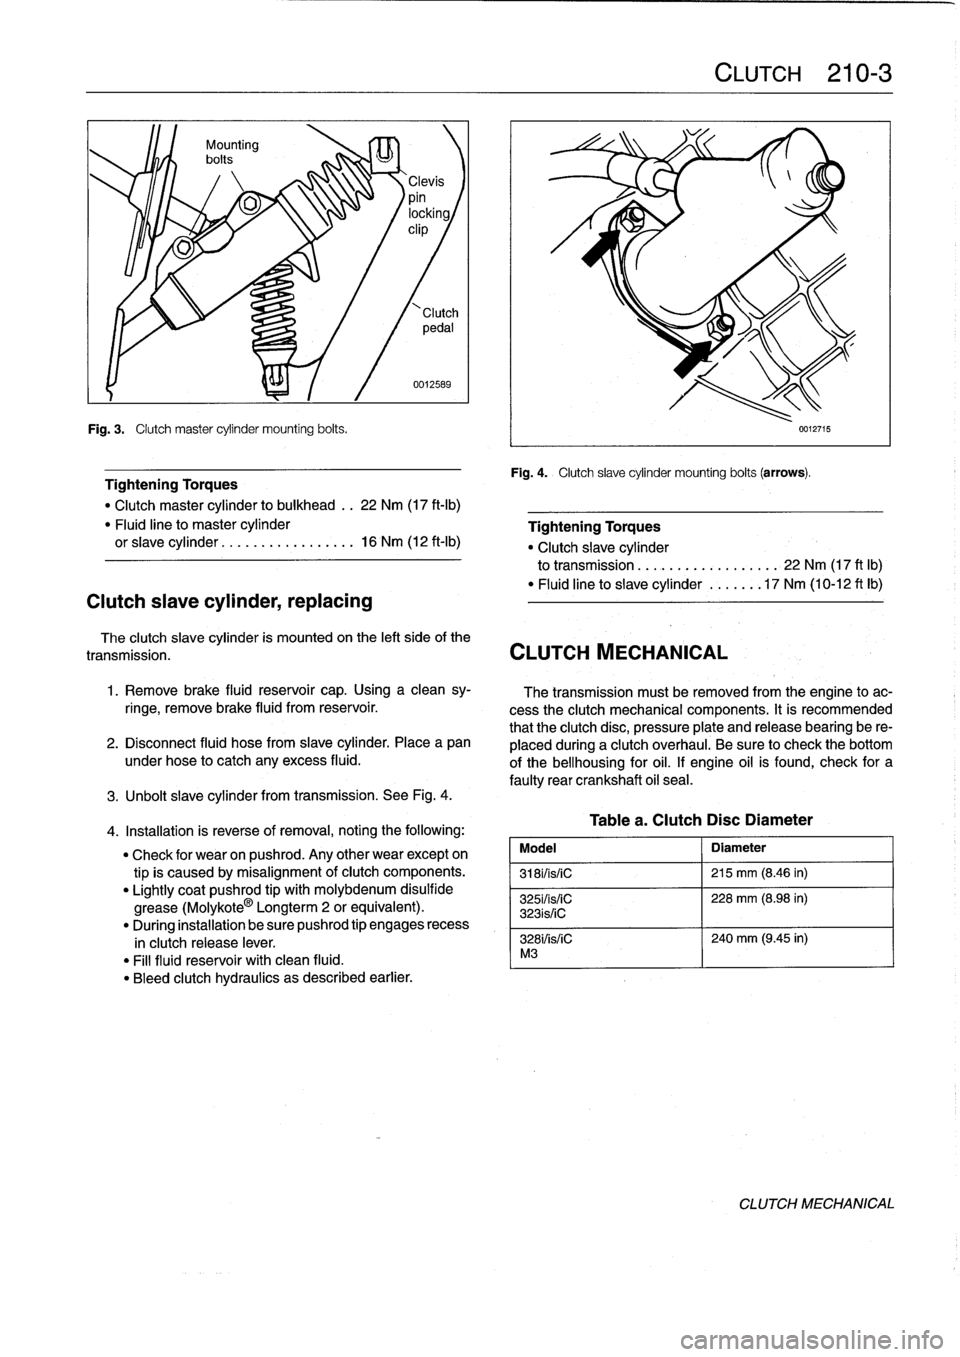 BMW 325i 1993 E36 Owners Manual Fig
.
3
.

	

Clutch
master
cylinder
mounting
bolts
.

Clutch
slave
cylinder,
replacing

0012589

Tightening
Torques

"
Clutch
master
cylinder
to
bulkhead
..
22
Nm
(17
ft-Ib)
"
Fluid
line
to
master
cy